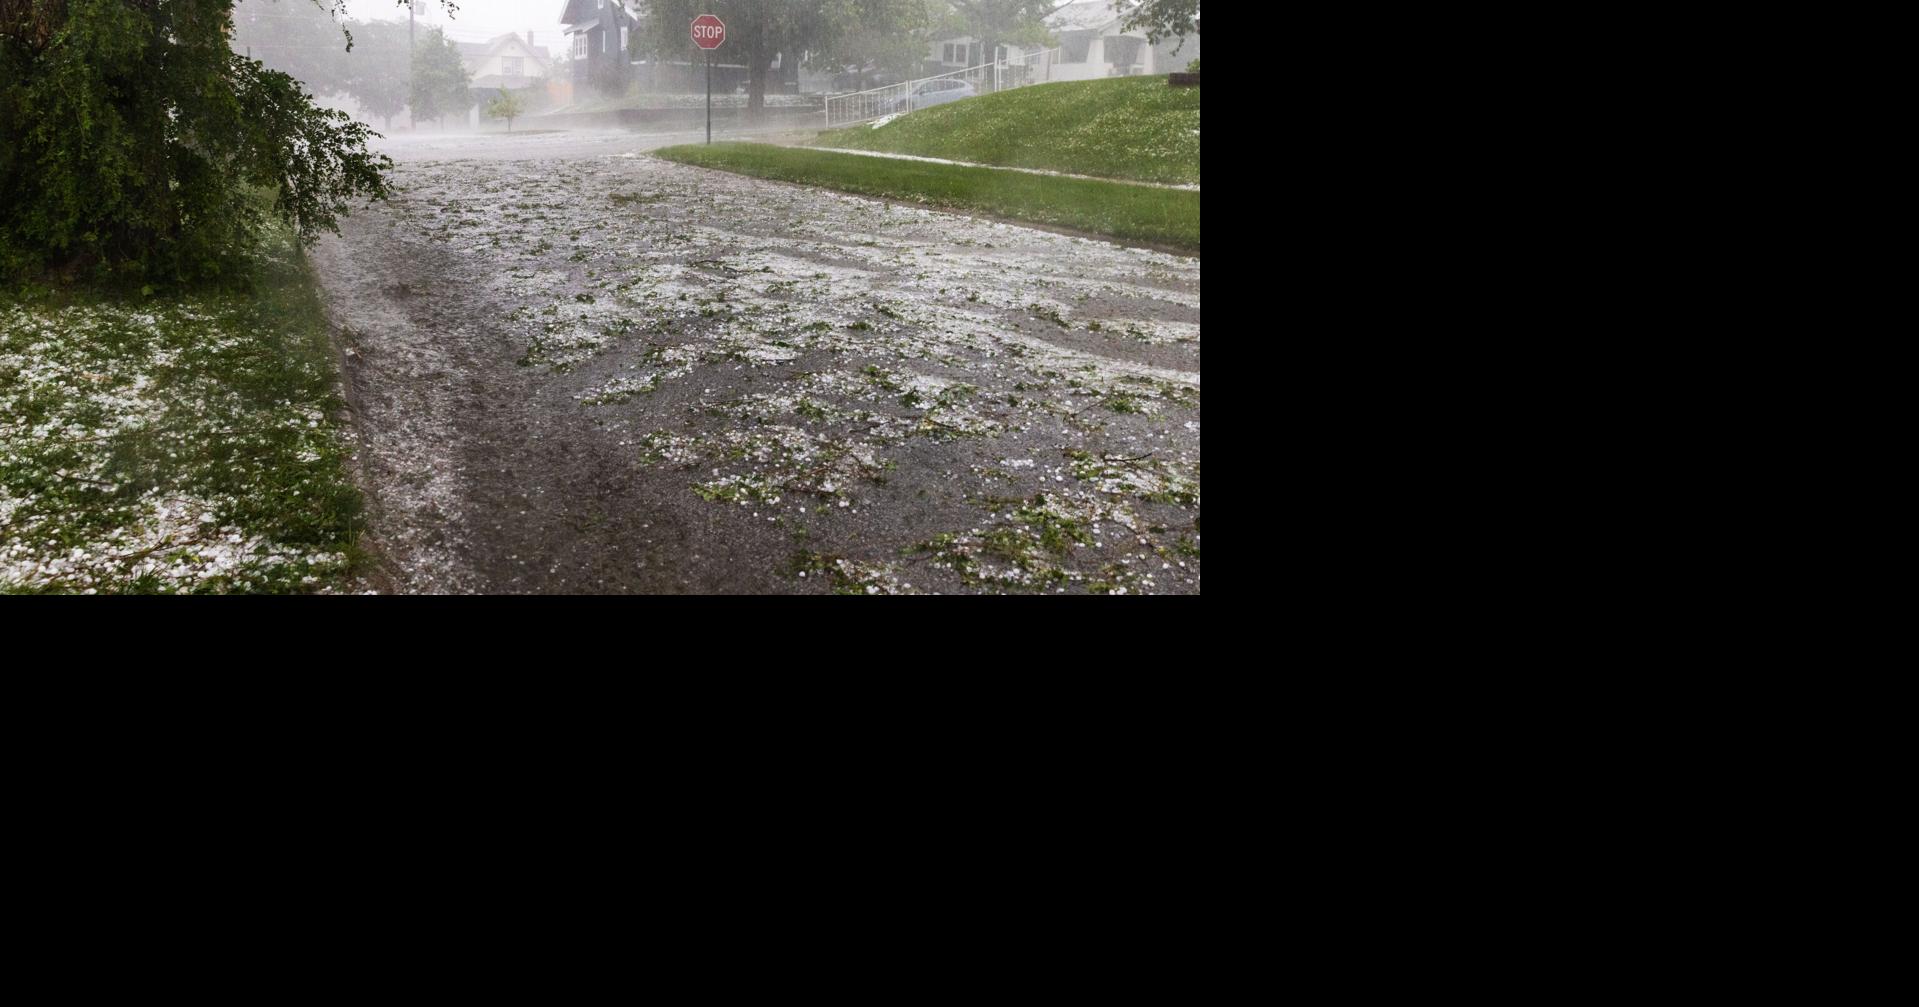 Increasing hail damage in Nebraska and elsewhere spurs call for more research